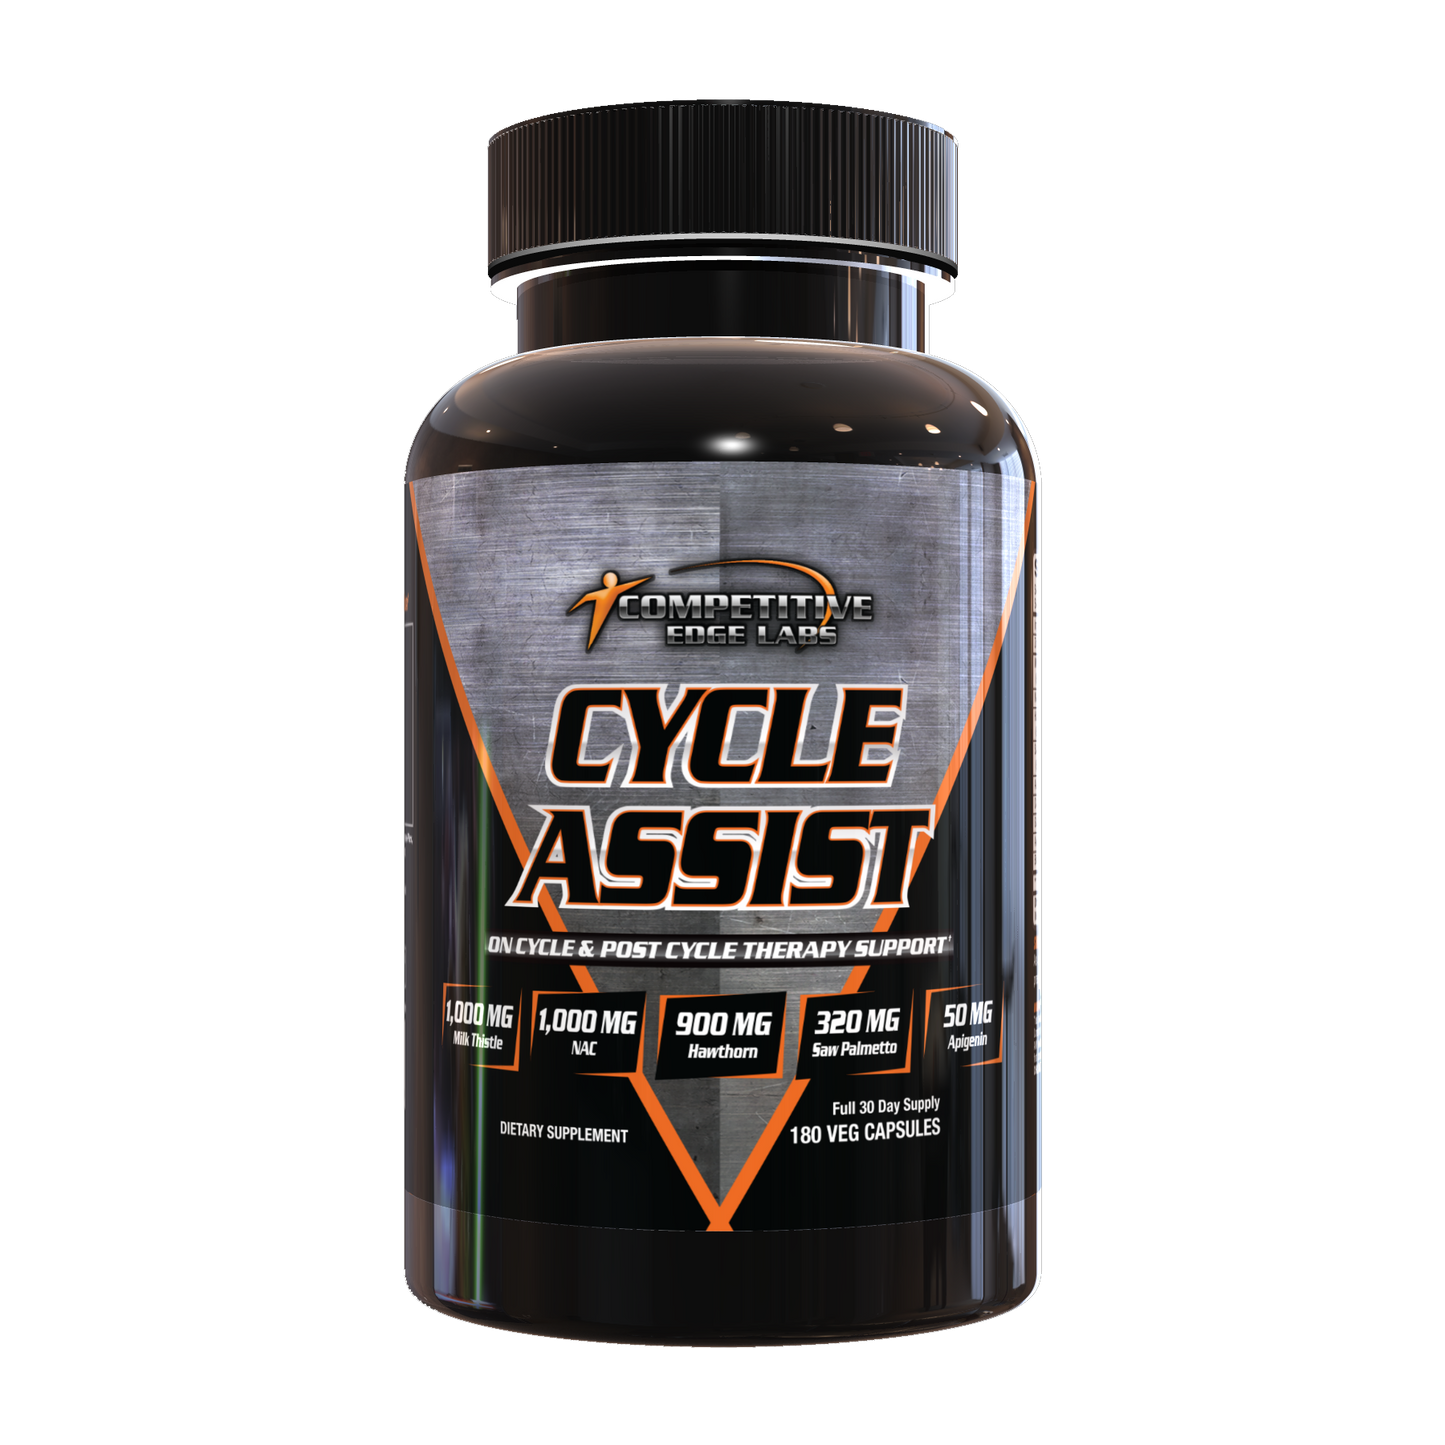 Competitive Edge Labs Cycle Assist - Front of the bottle